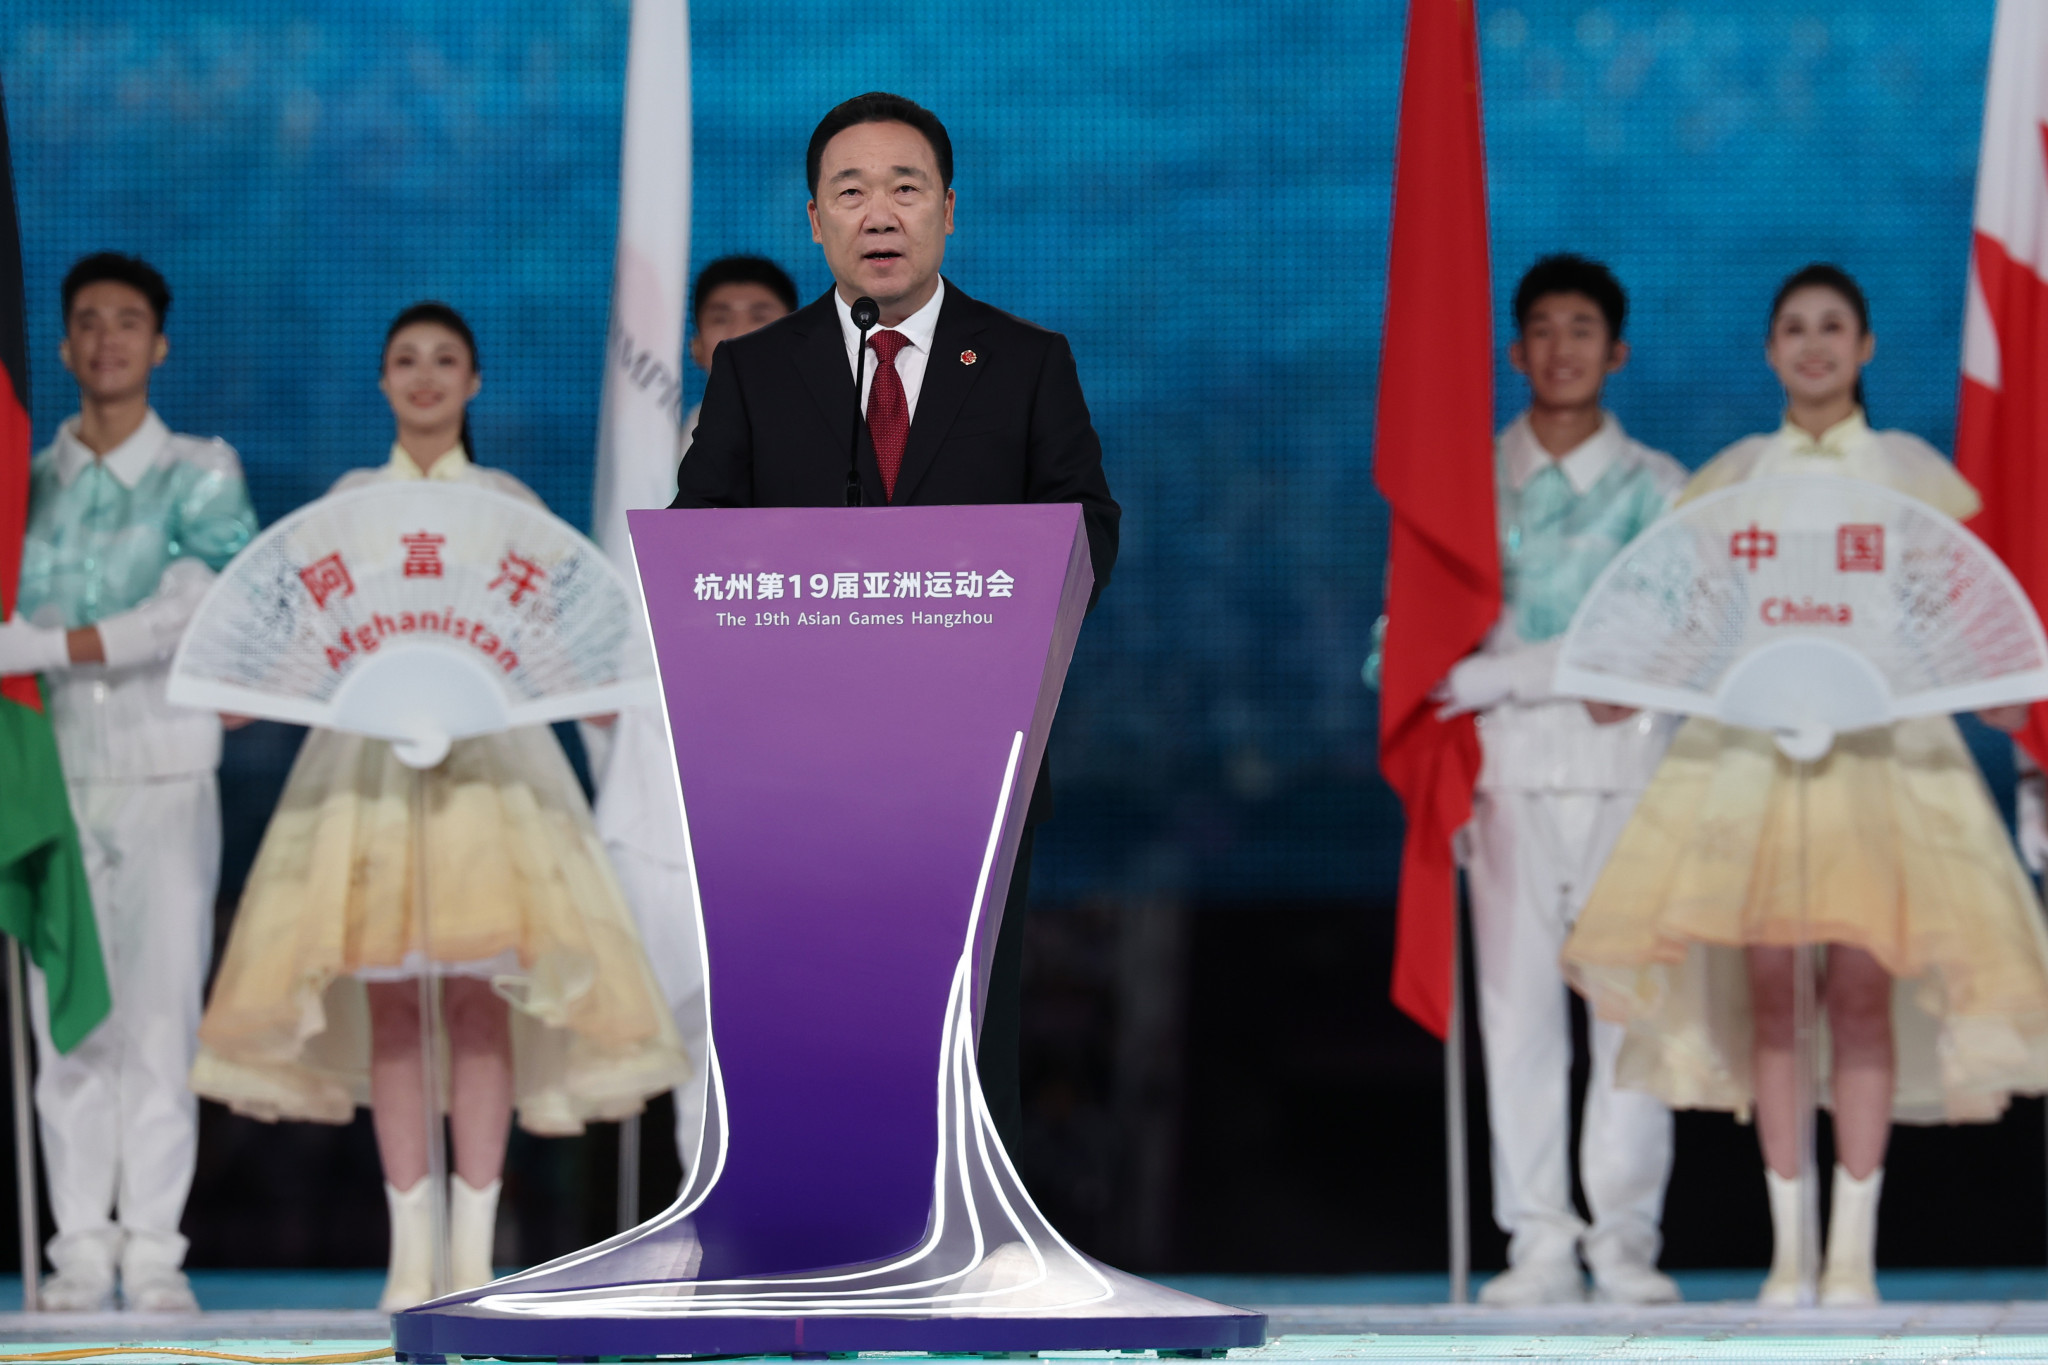 Hangzhou 2022 co-leader Wang Hao said Chinese President Xi Jinping's encouragement was key to ensure the Asian Games could be staged this year after last year's postponement ©Getty Images